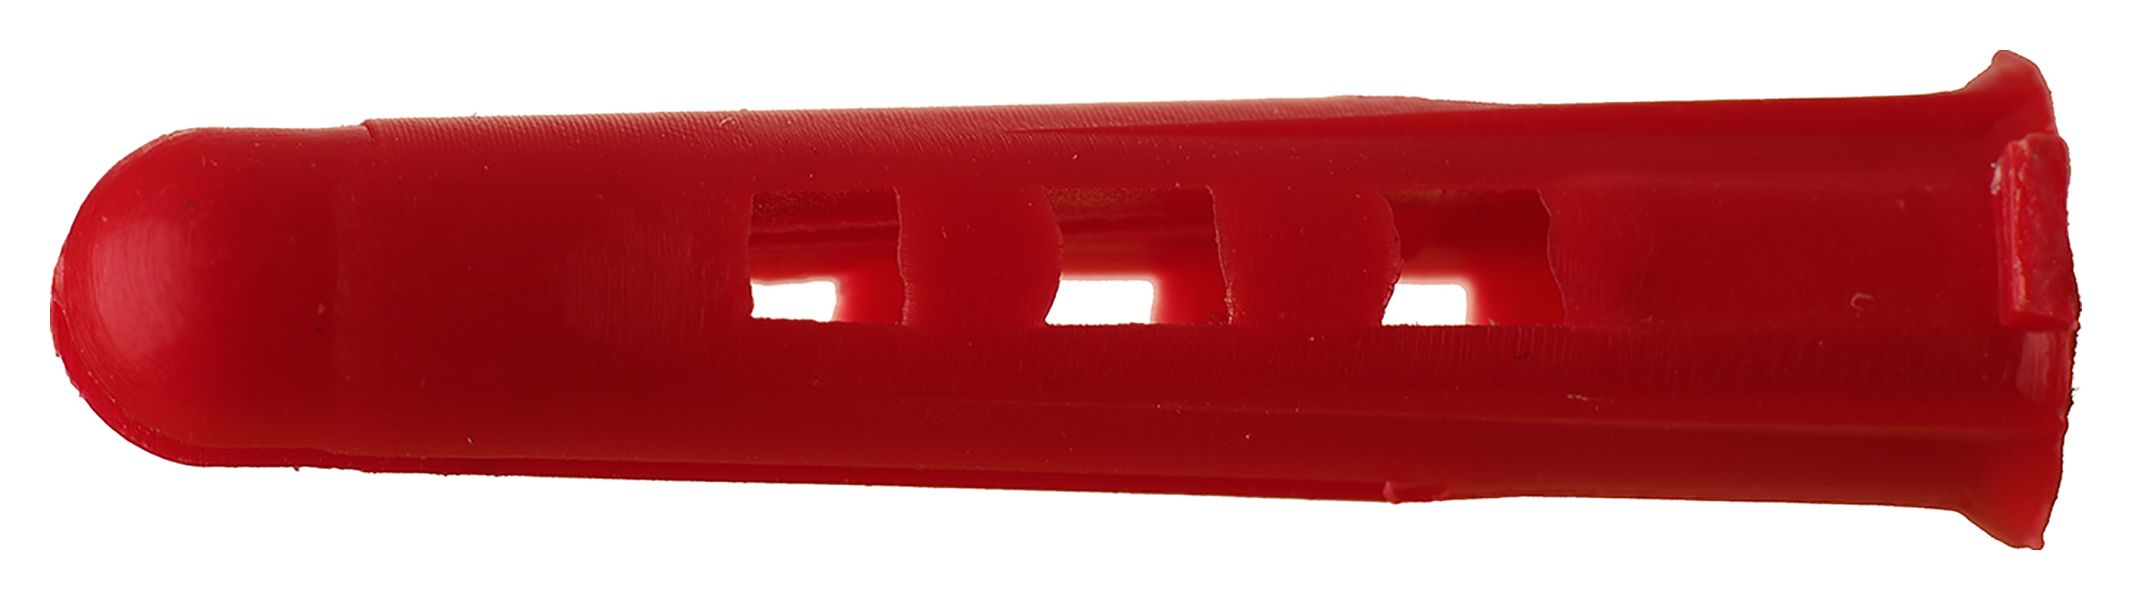 Fischer Wall Plugs Red 6mm Bag - Pack of 300